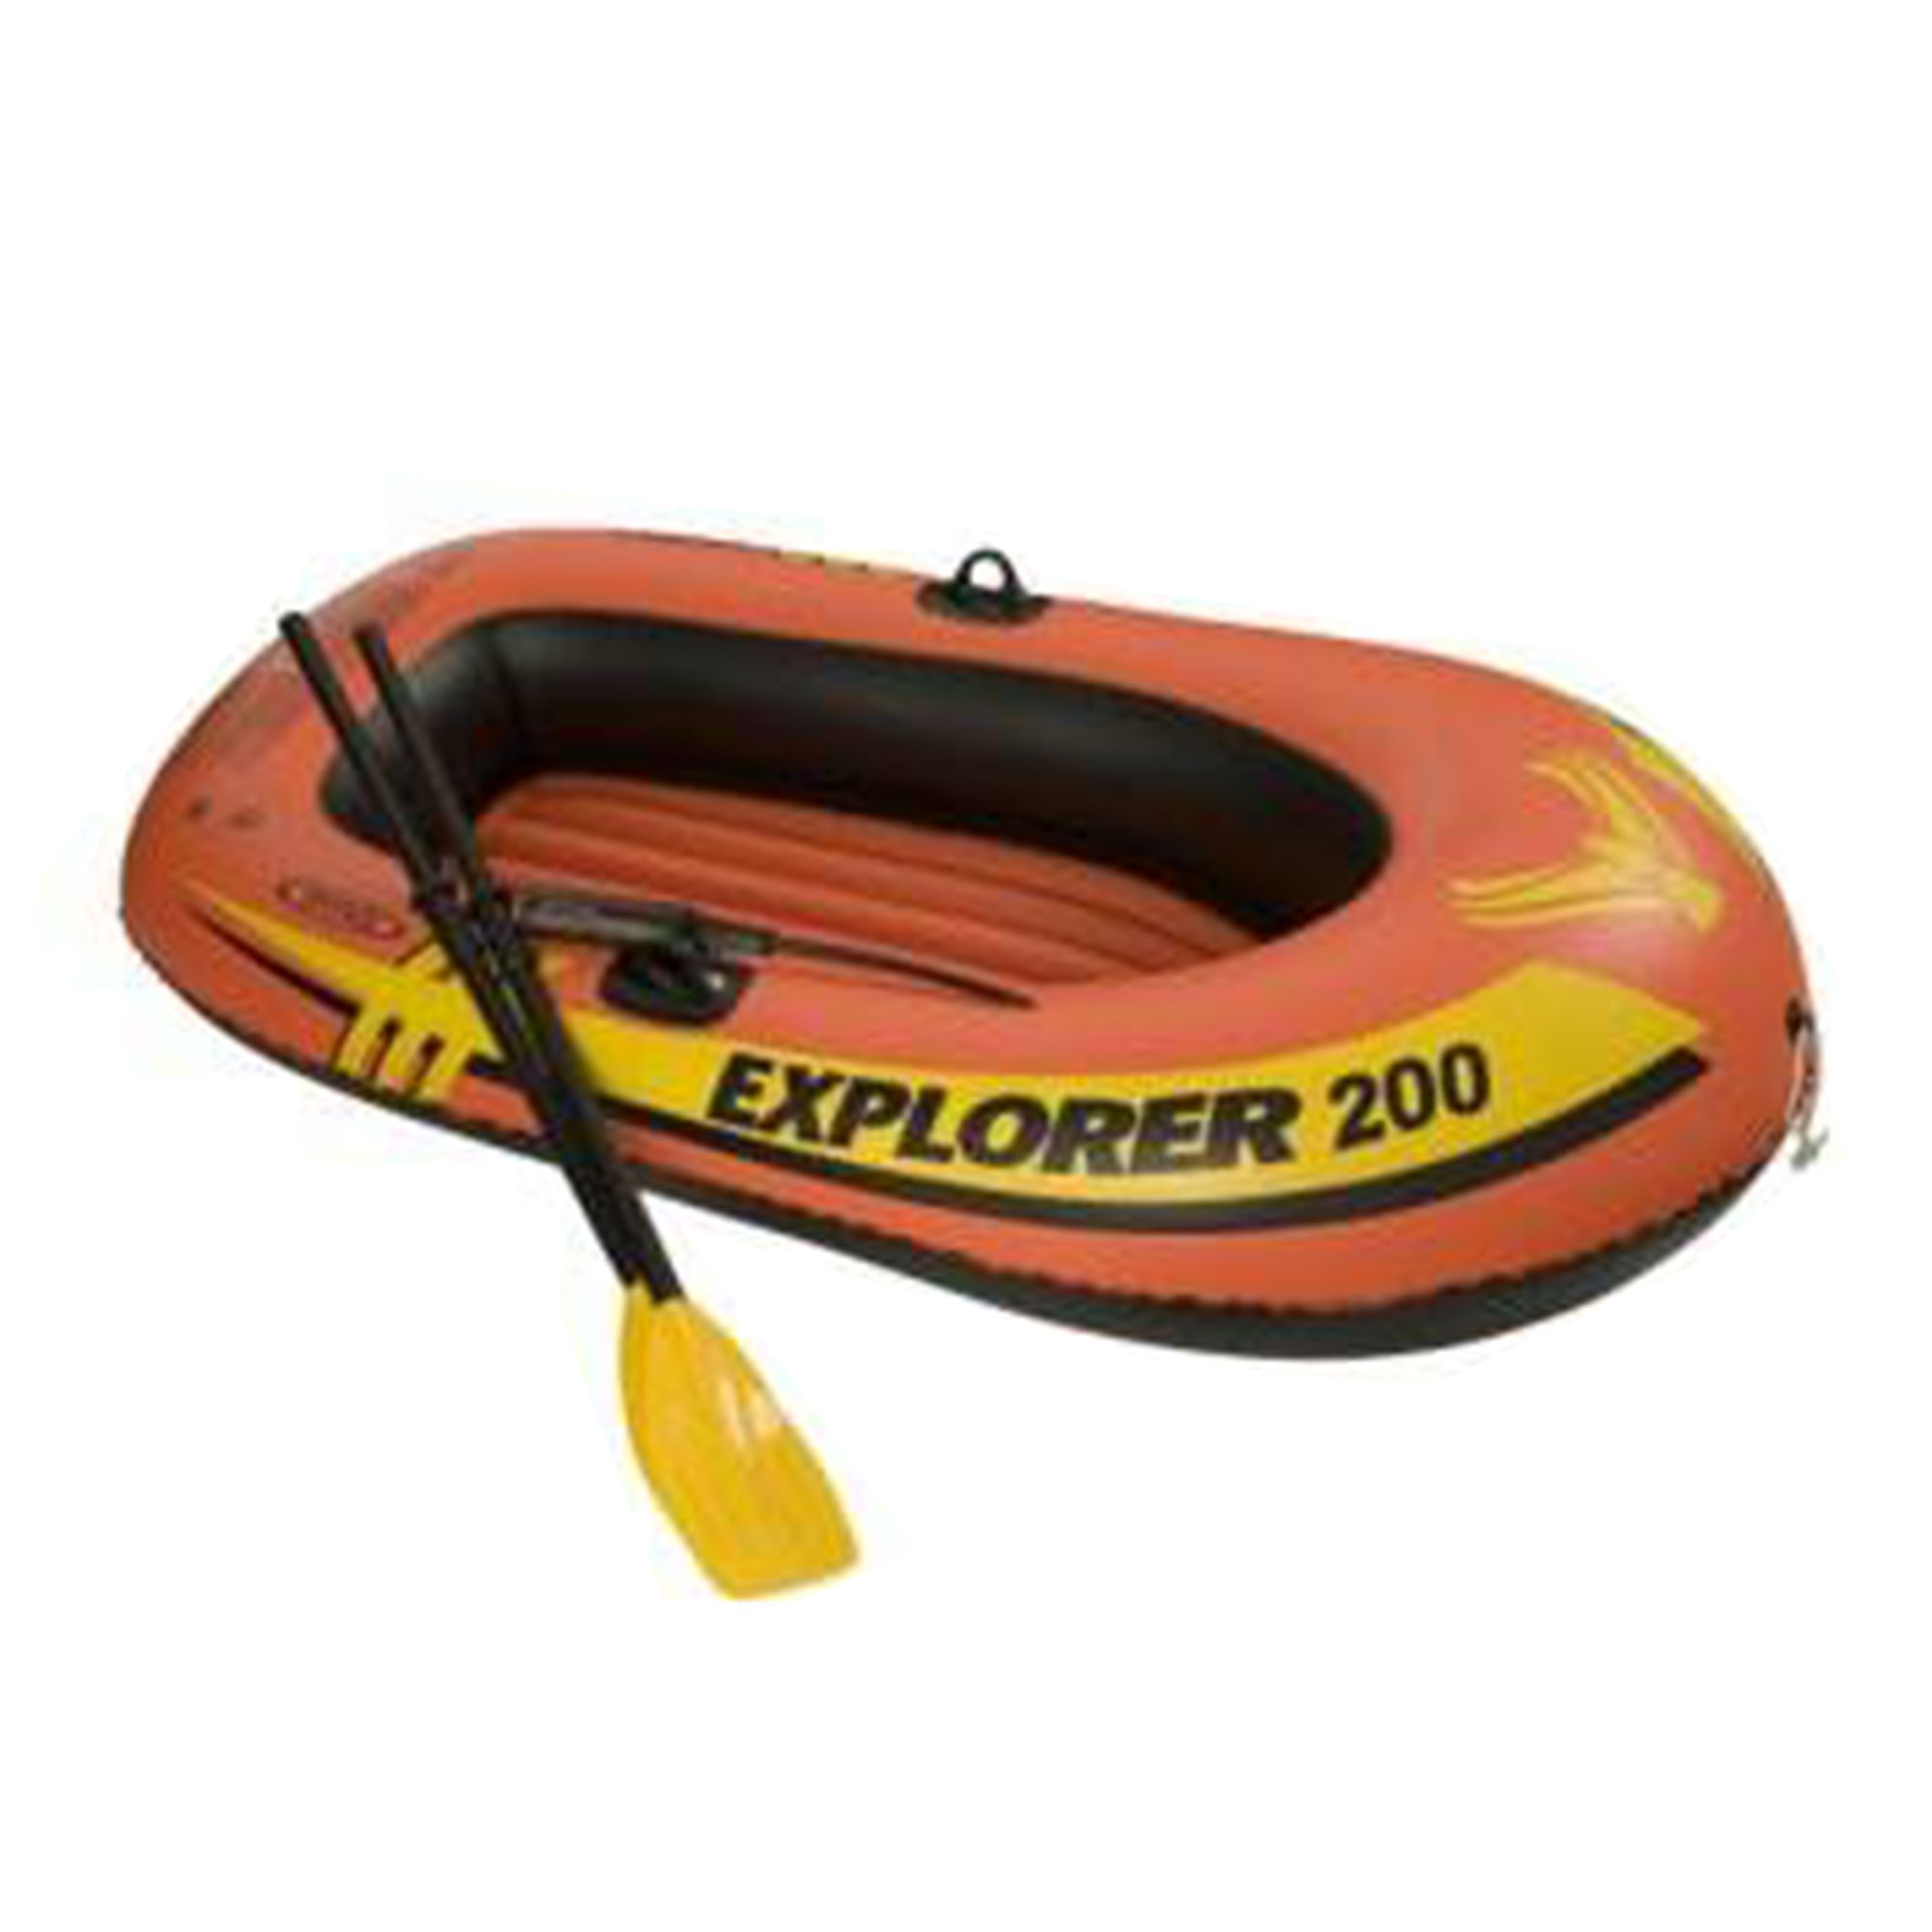 Intex Explorer 200 Inflatable 2 Person River Boat Raft w/ Oars & Pump (2 Pack) - image 3 of 6